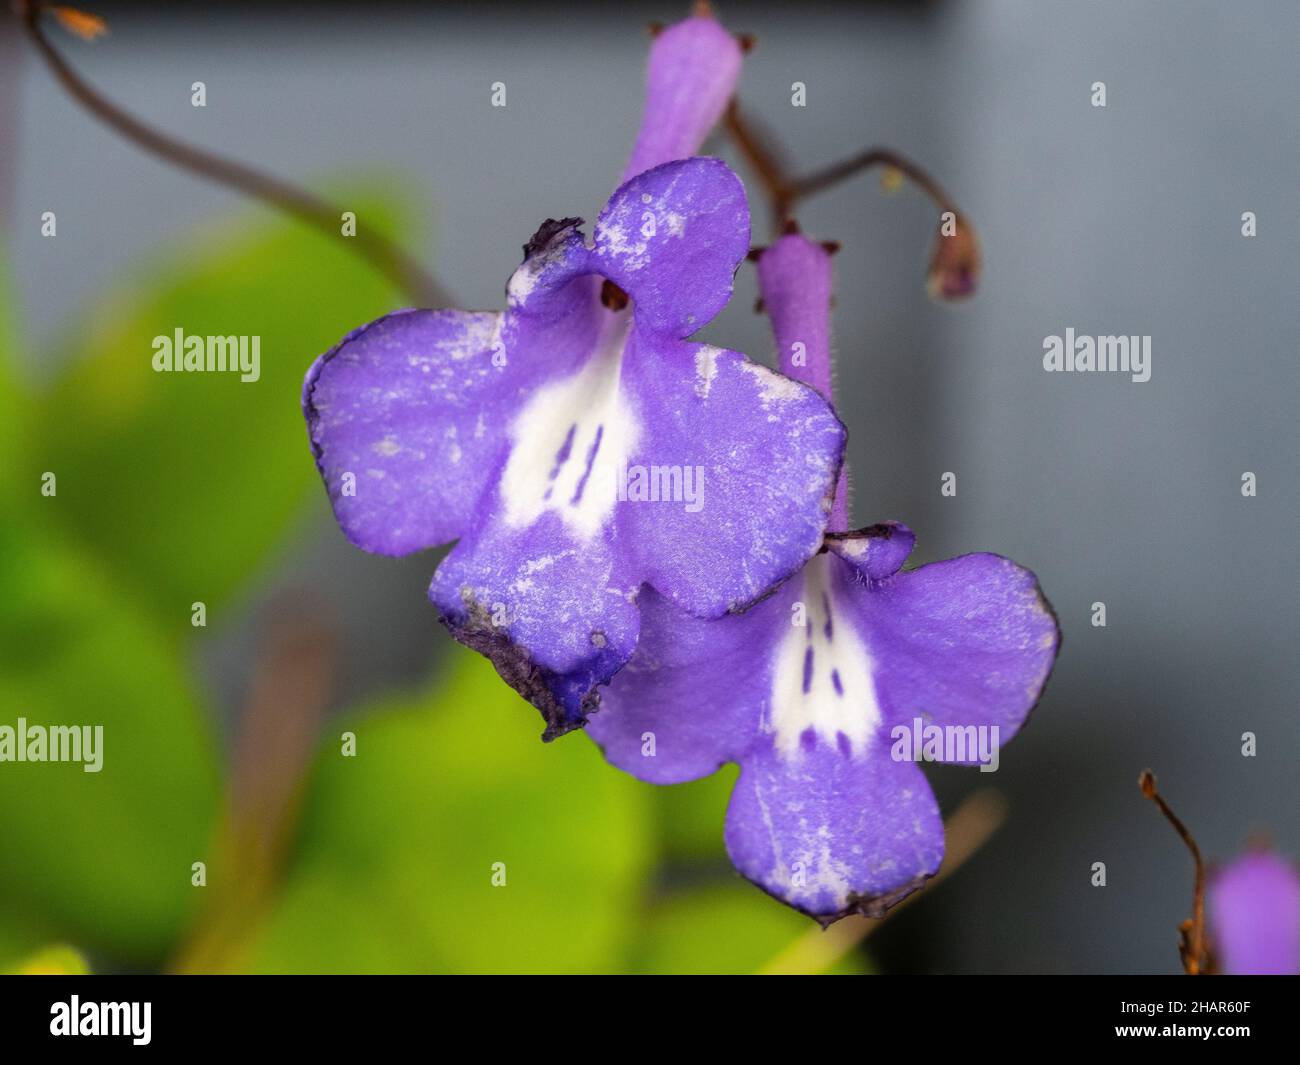 Closeup of purple flowers with white throats and green leaves, Nodding Violets or Streptocarpus caulescens, flowering in an Australian coastal garden Stock Photo